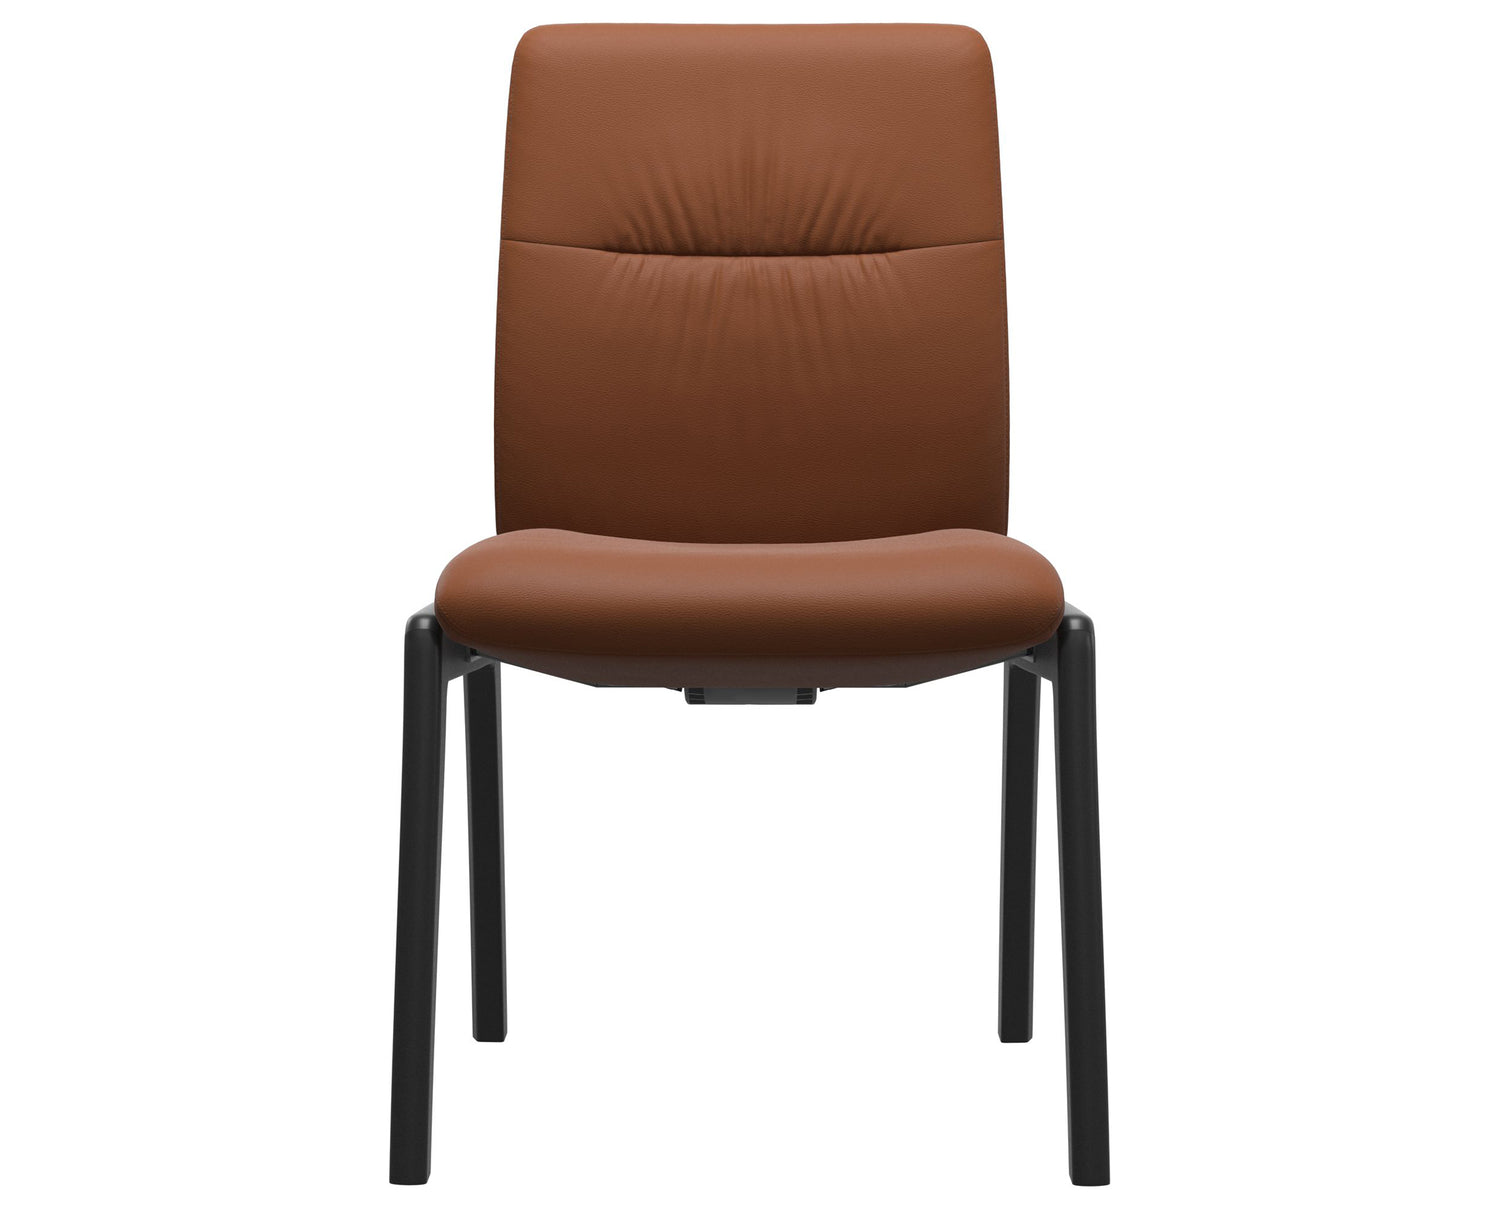 Paloma Leather New Cognac & Black Base | Stressless Mint Low Back D100 Dining Chair | Valley Ridge Furniture